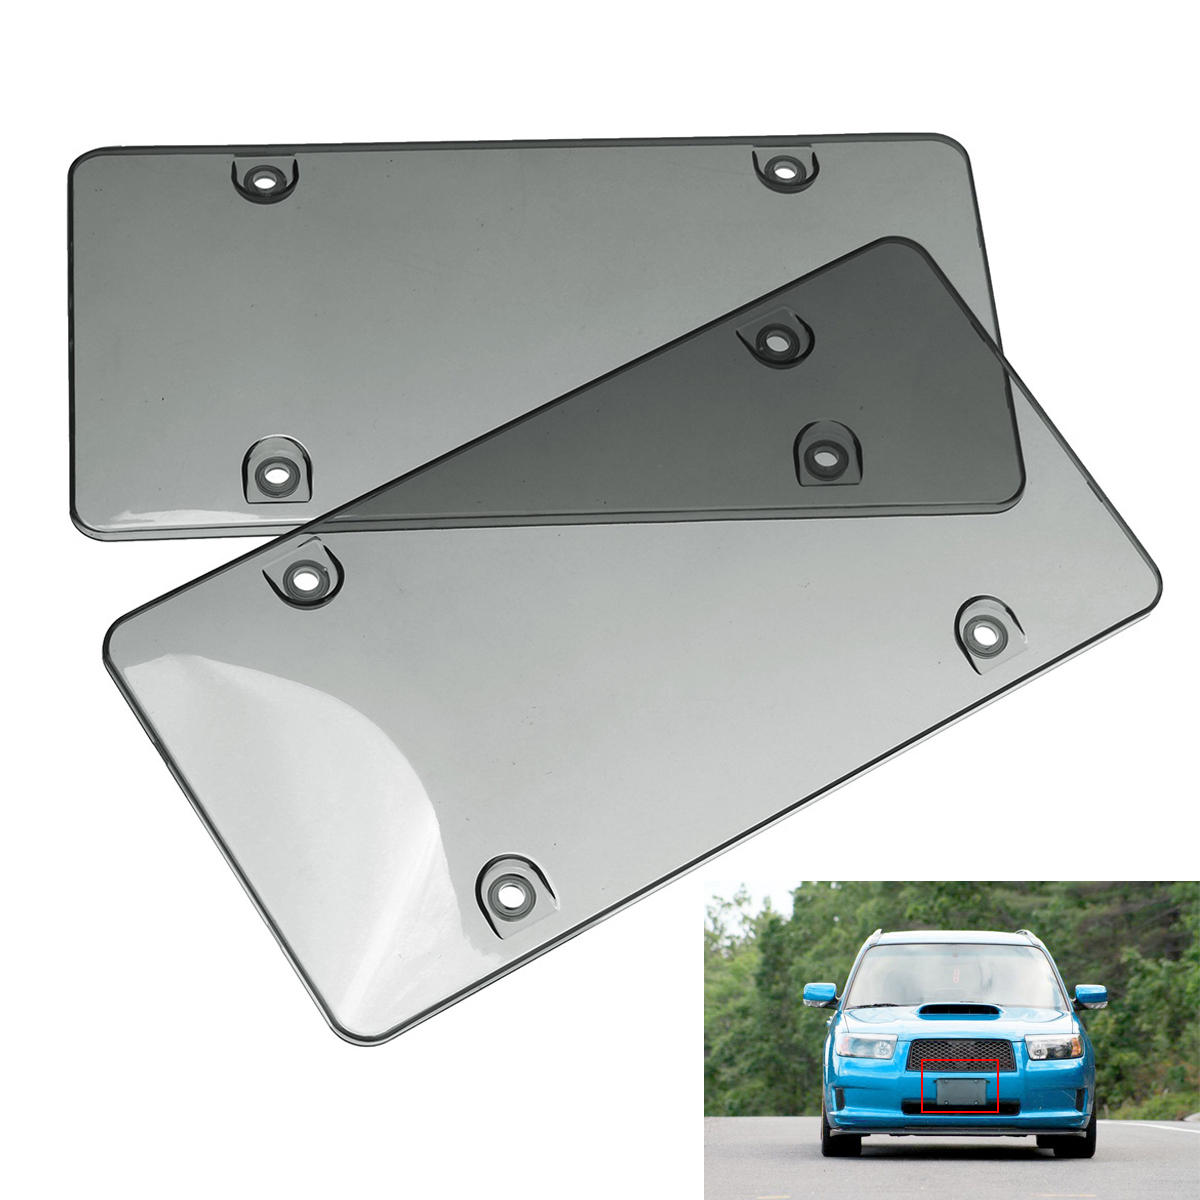 Tinted Clear Smoke License Plate Tag Frame Cover Shield Car Truck